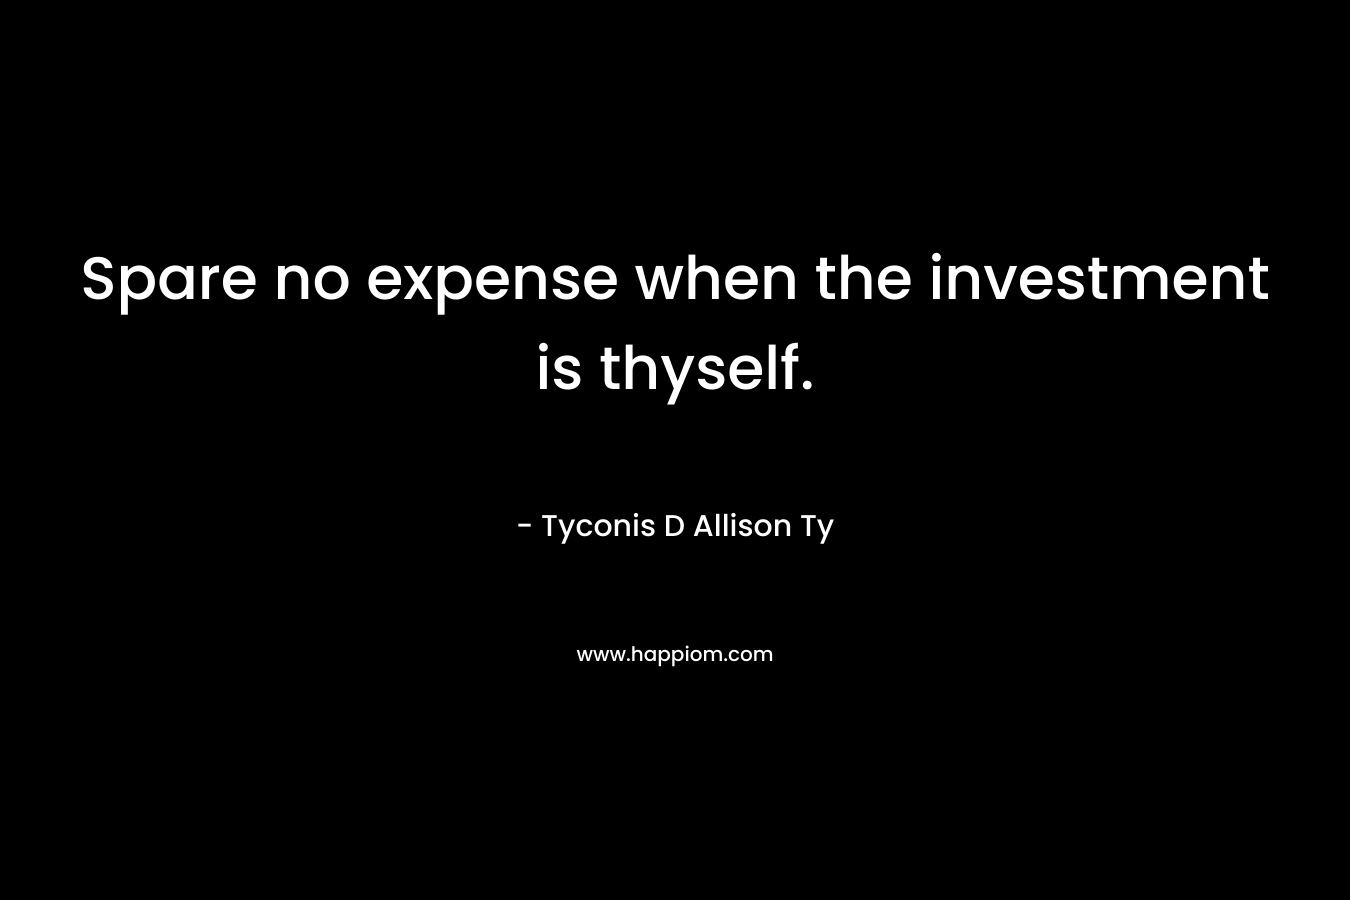 Spare no expense when the investment is thyself. – Tyconis D Allison Ty